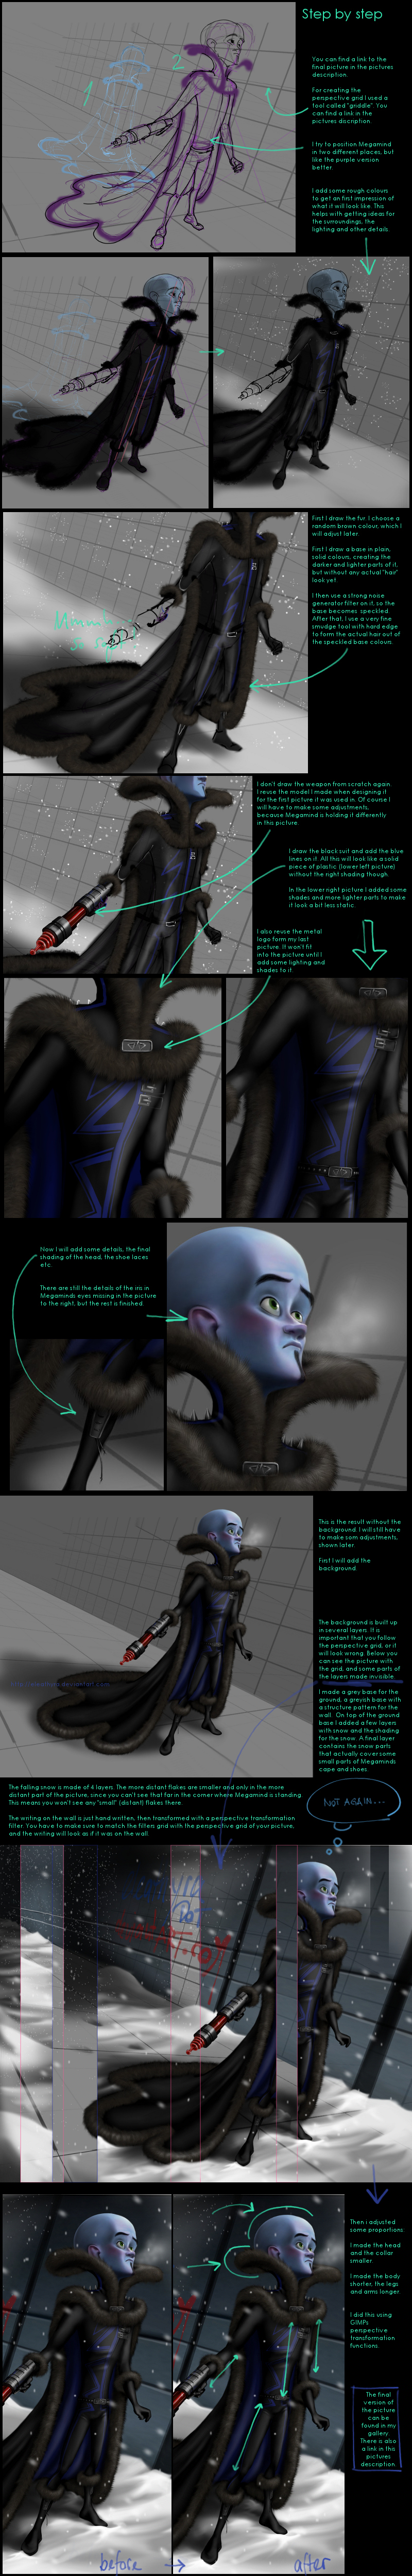 Megamind in winter clothing - Step By Step